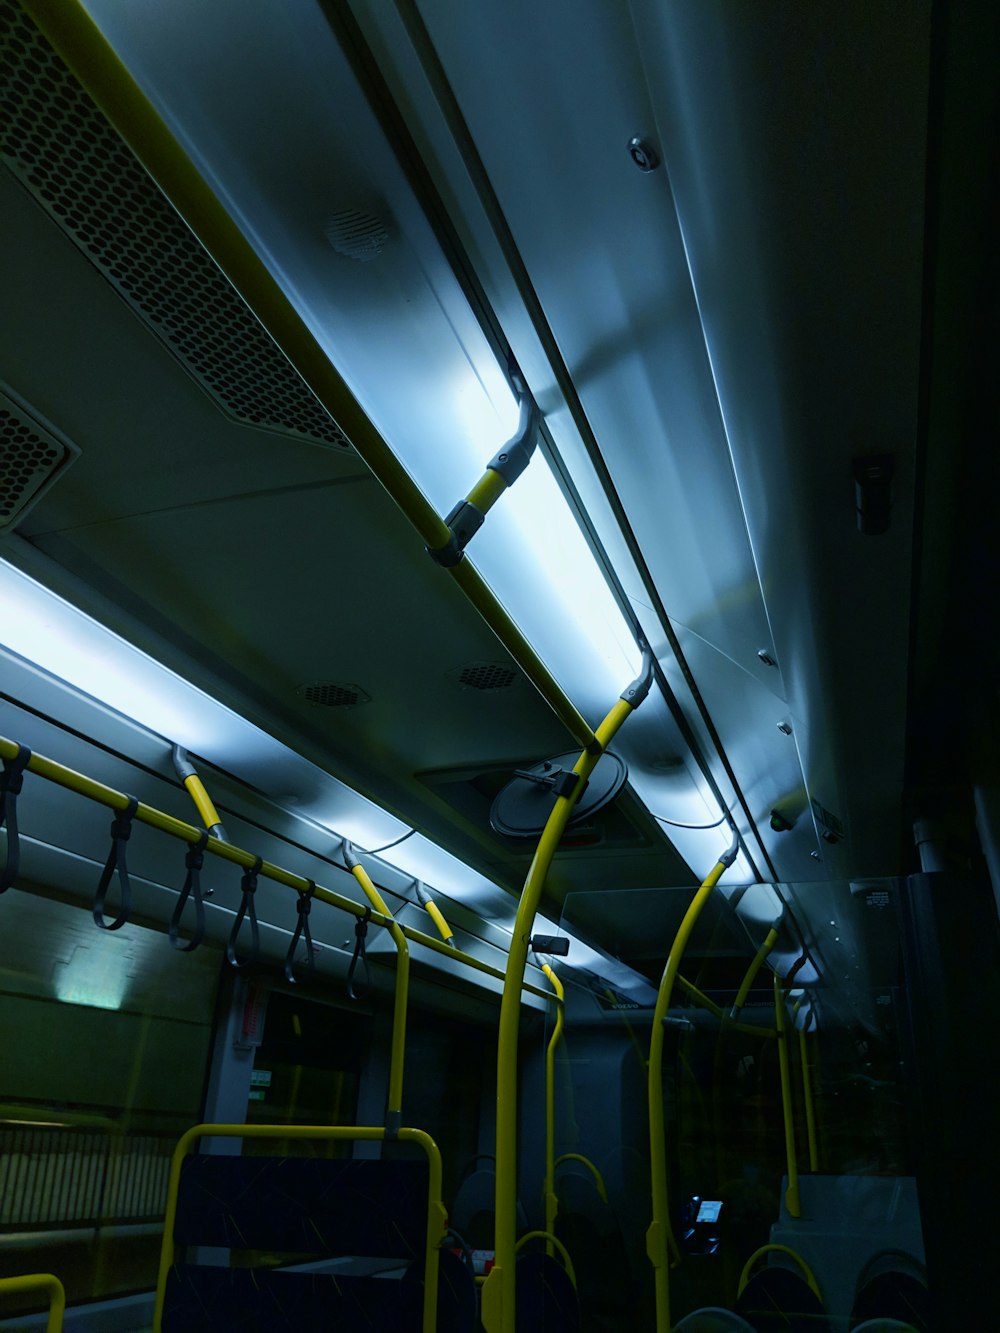 the interior of a public transit bus at night